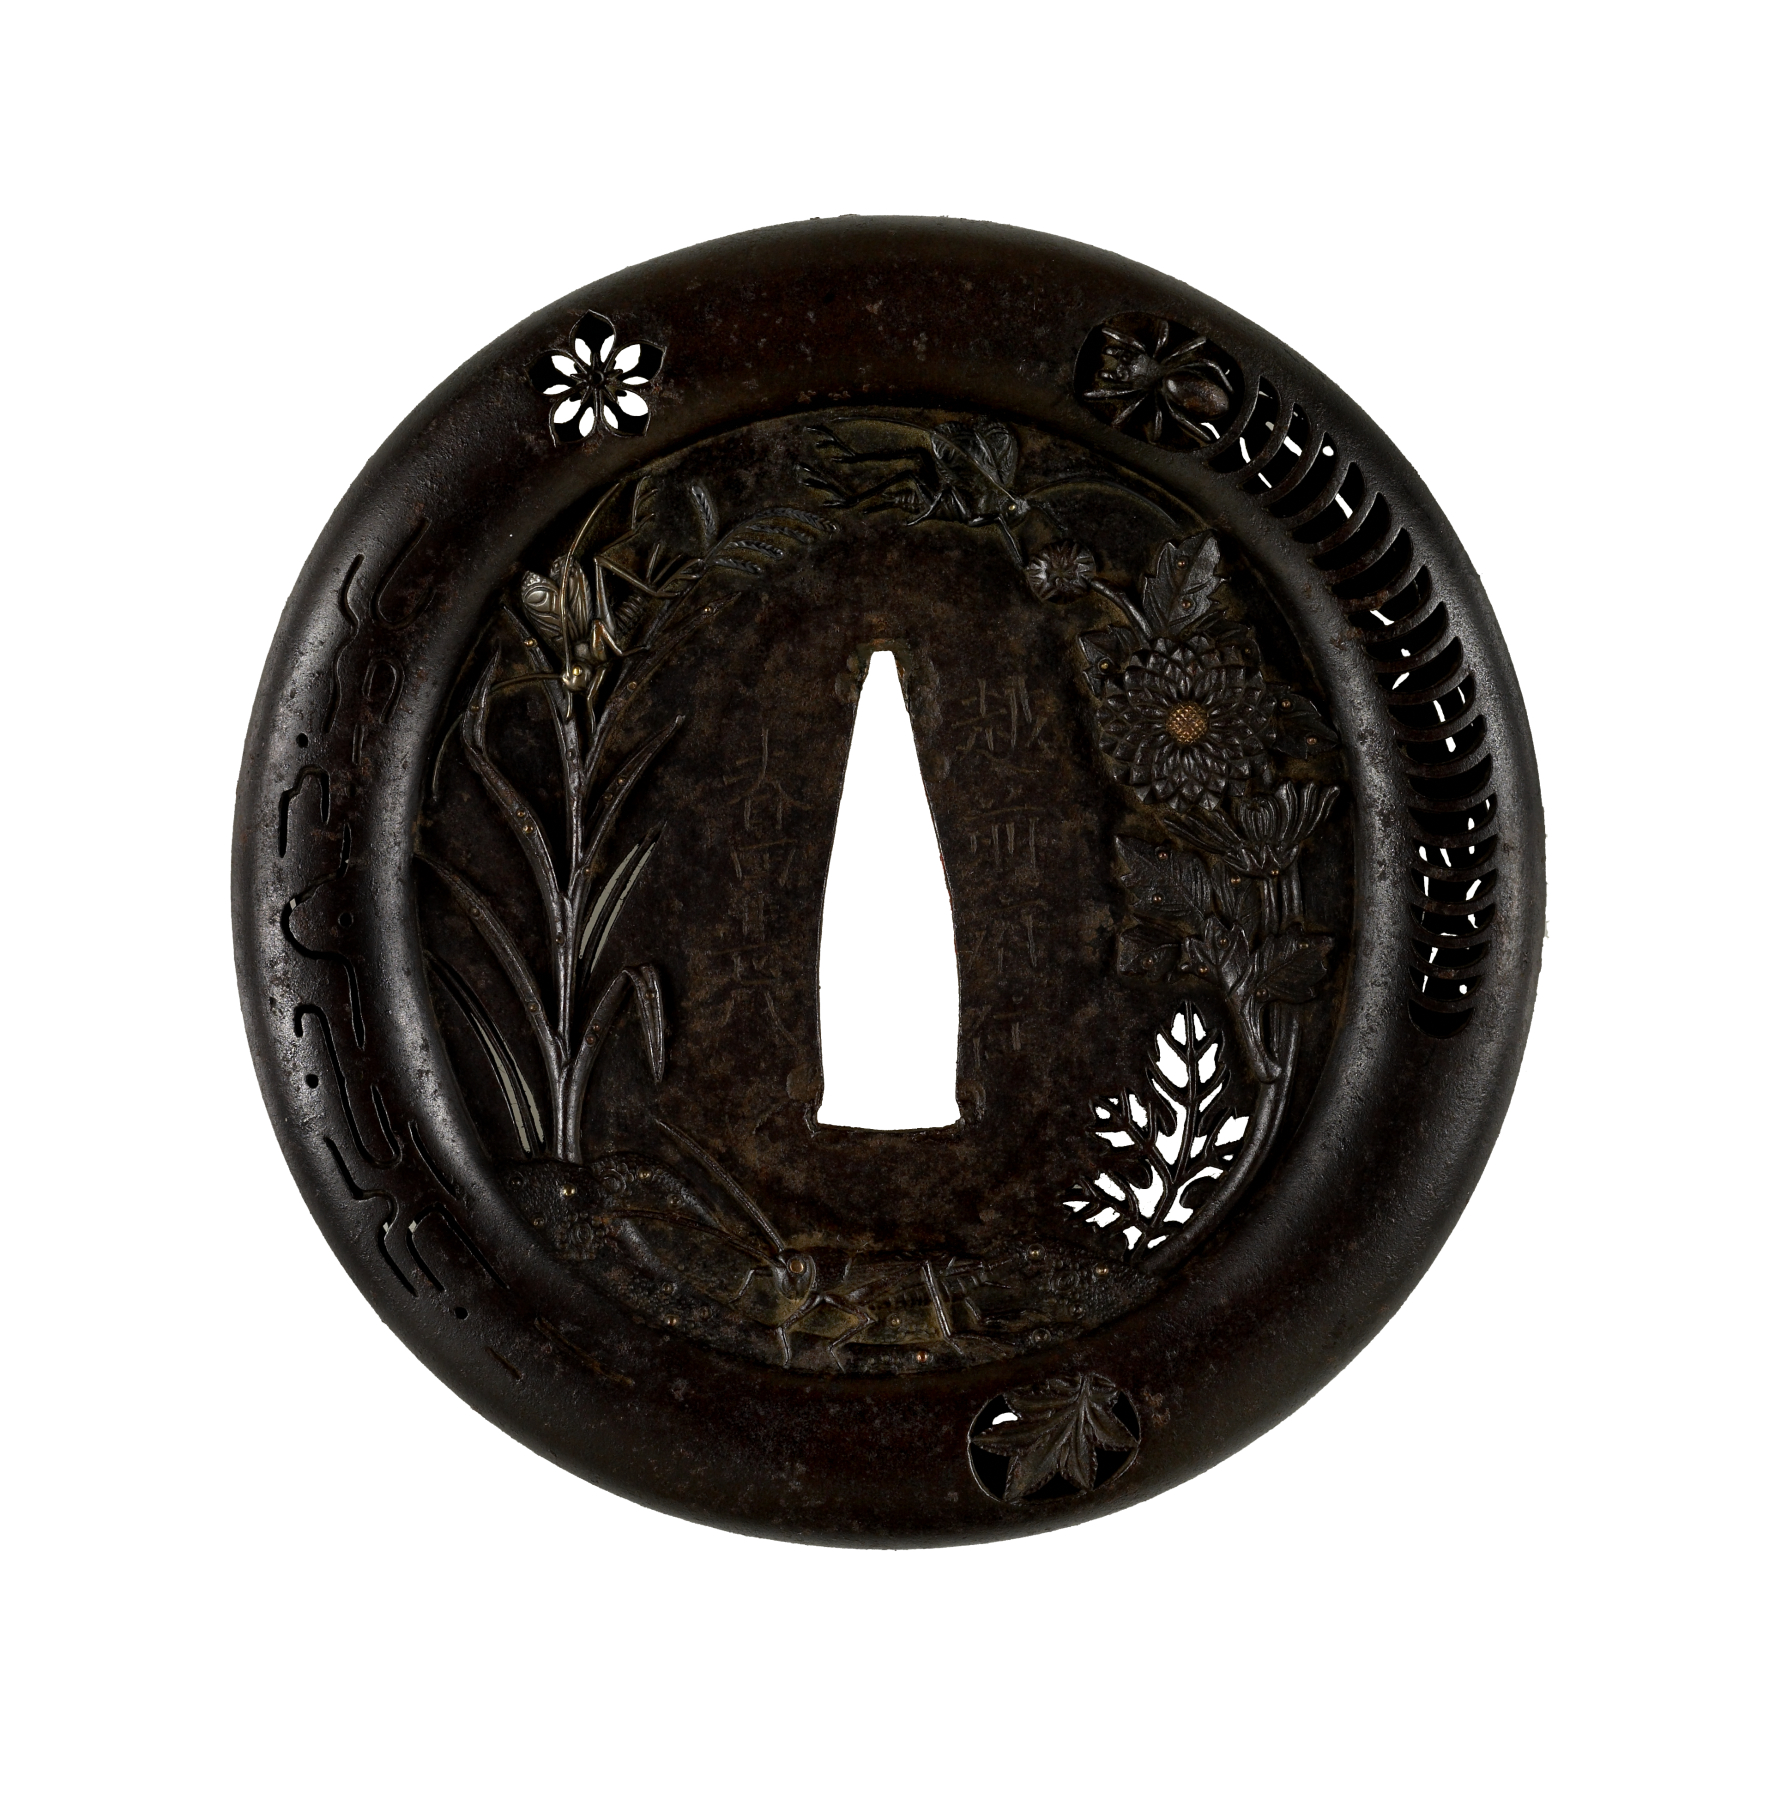 Image for Tsuba with Autumn Flora and Insects